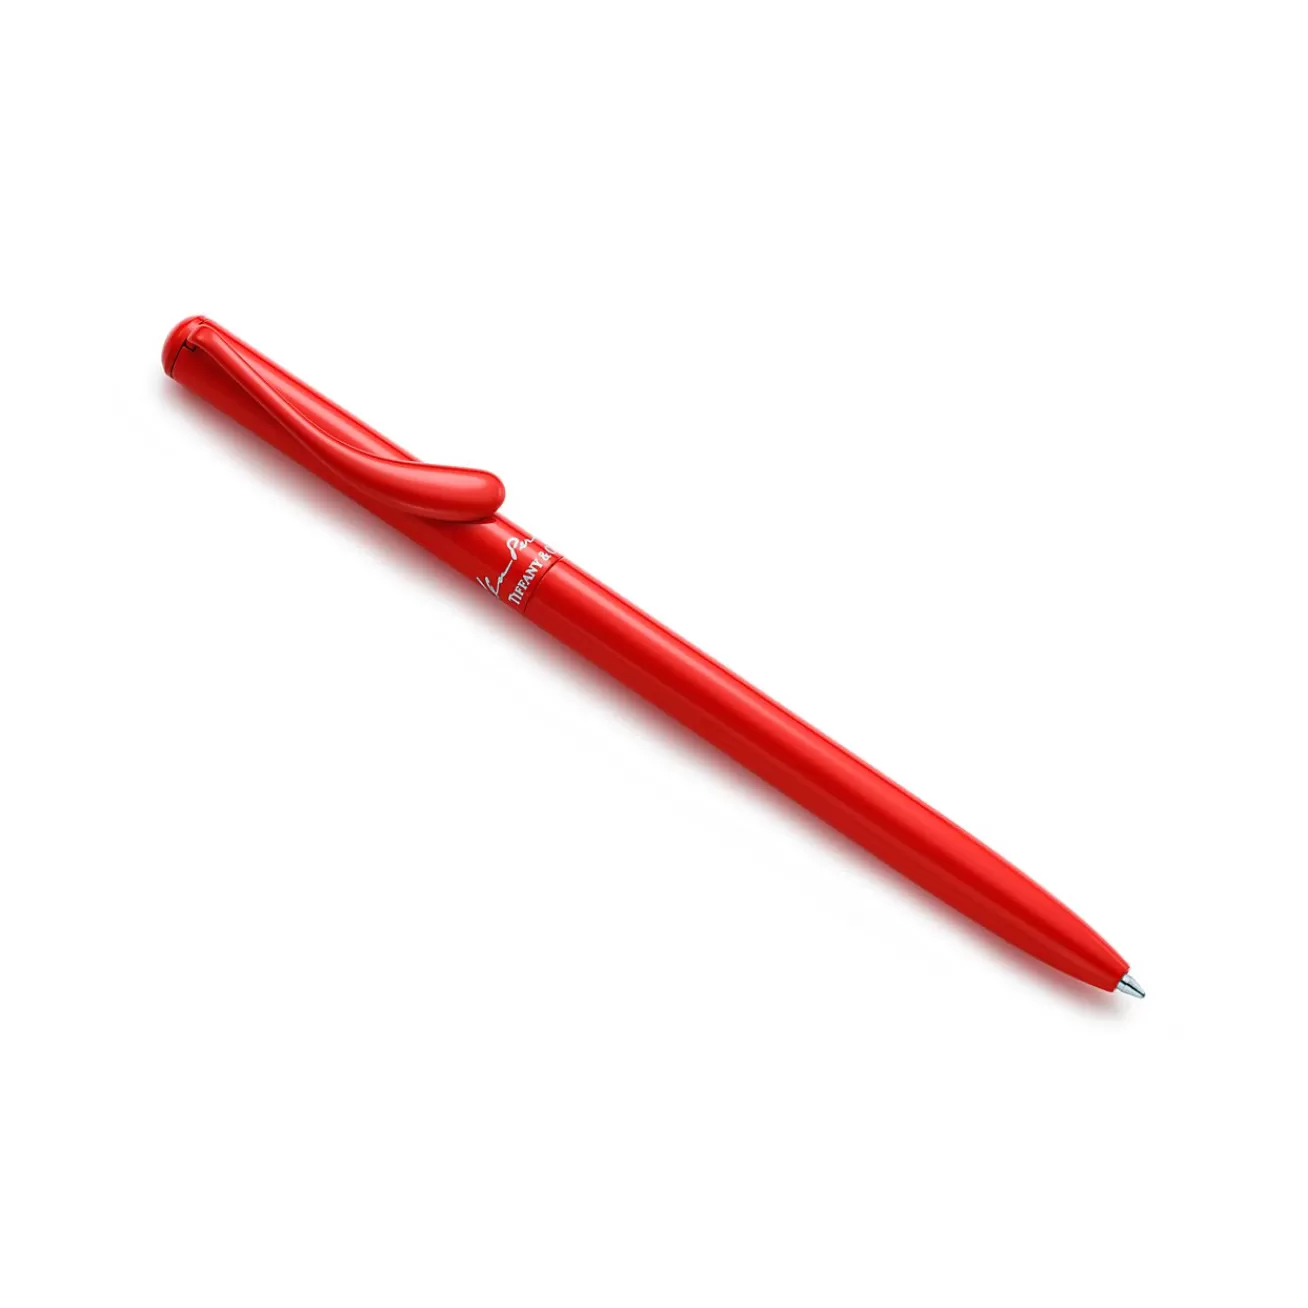 Tiffany & Co. Elsa Peretti® ballpoint pen. Red lacquer finish over brass. | ^ Stationery, Games & Unique Objects | Games & Novelties